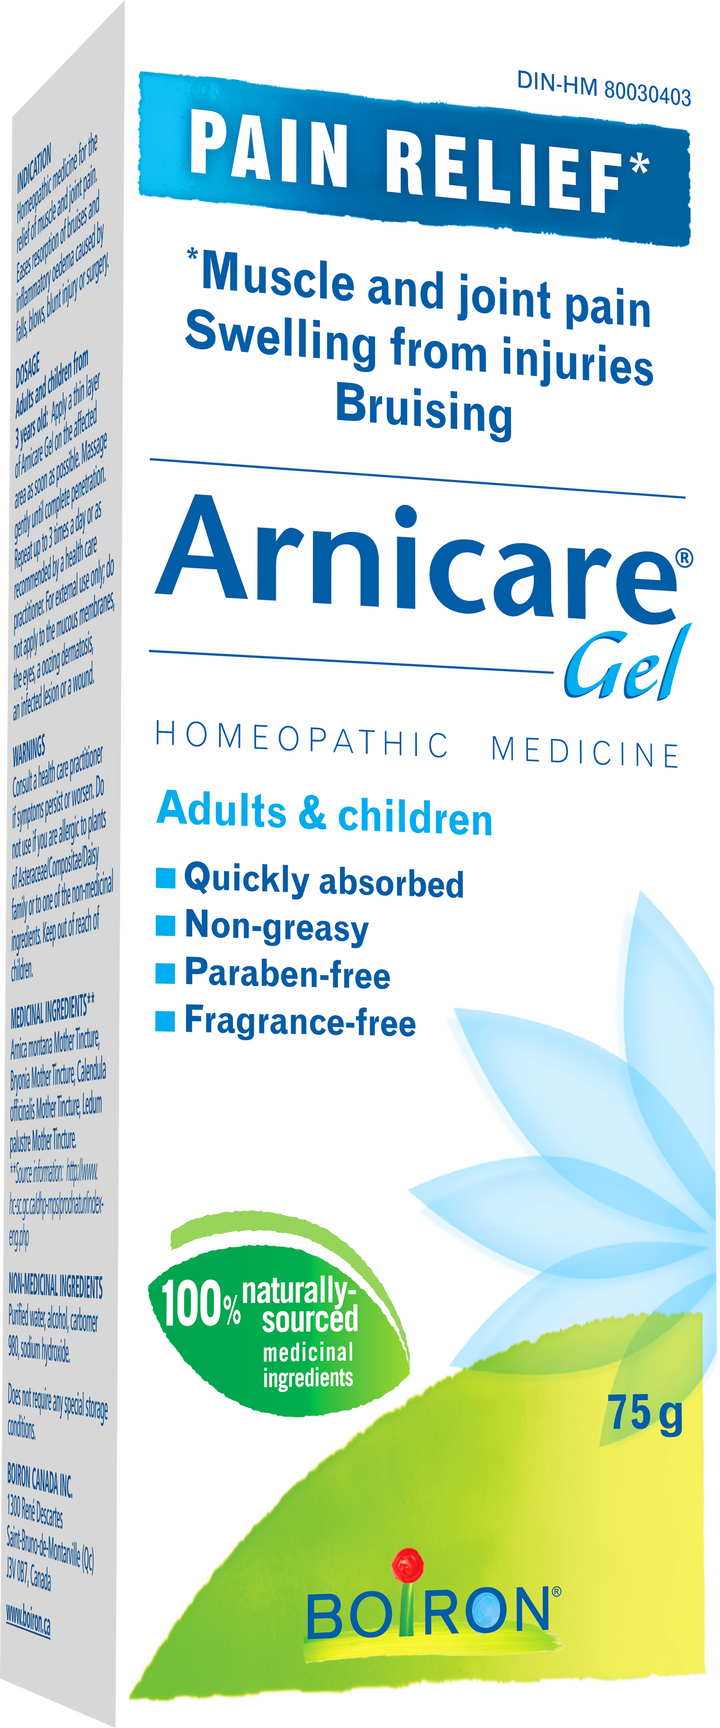 Boiron Arnicare Gel Muscle And Joint Pain